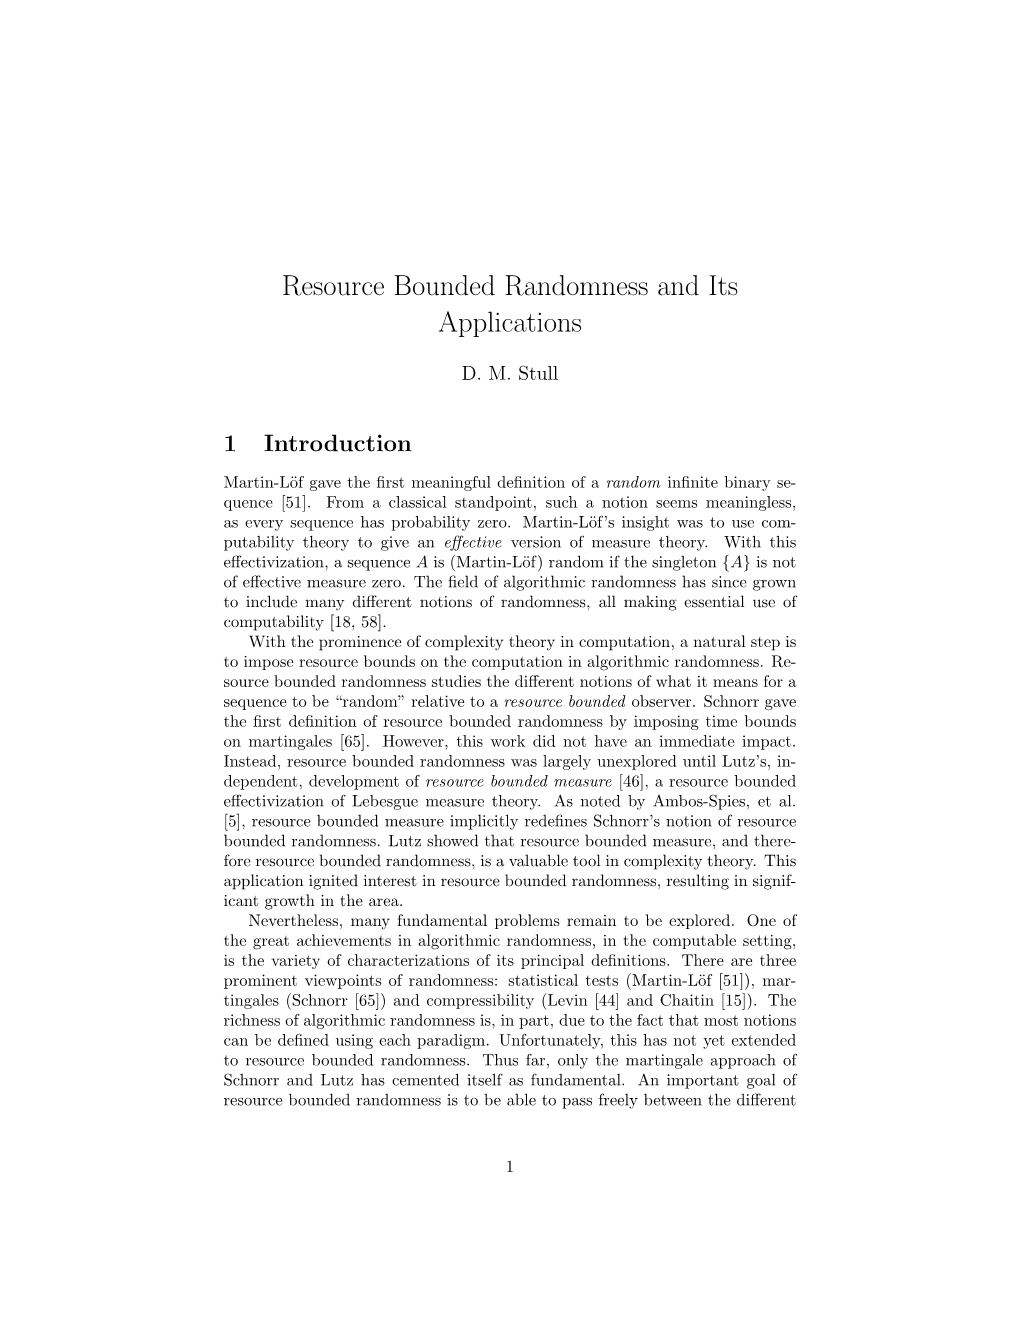 Resource Bounded Randomness and Its Applications